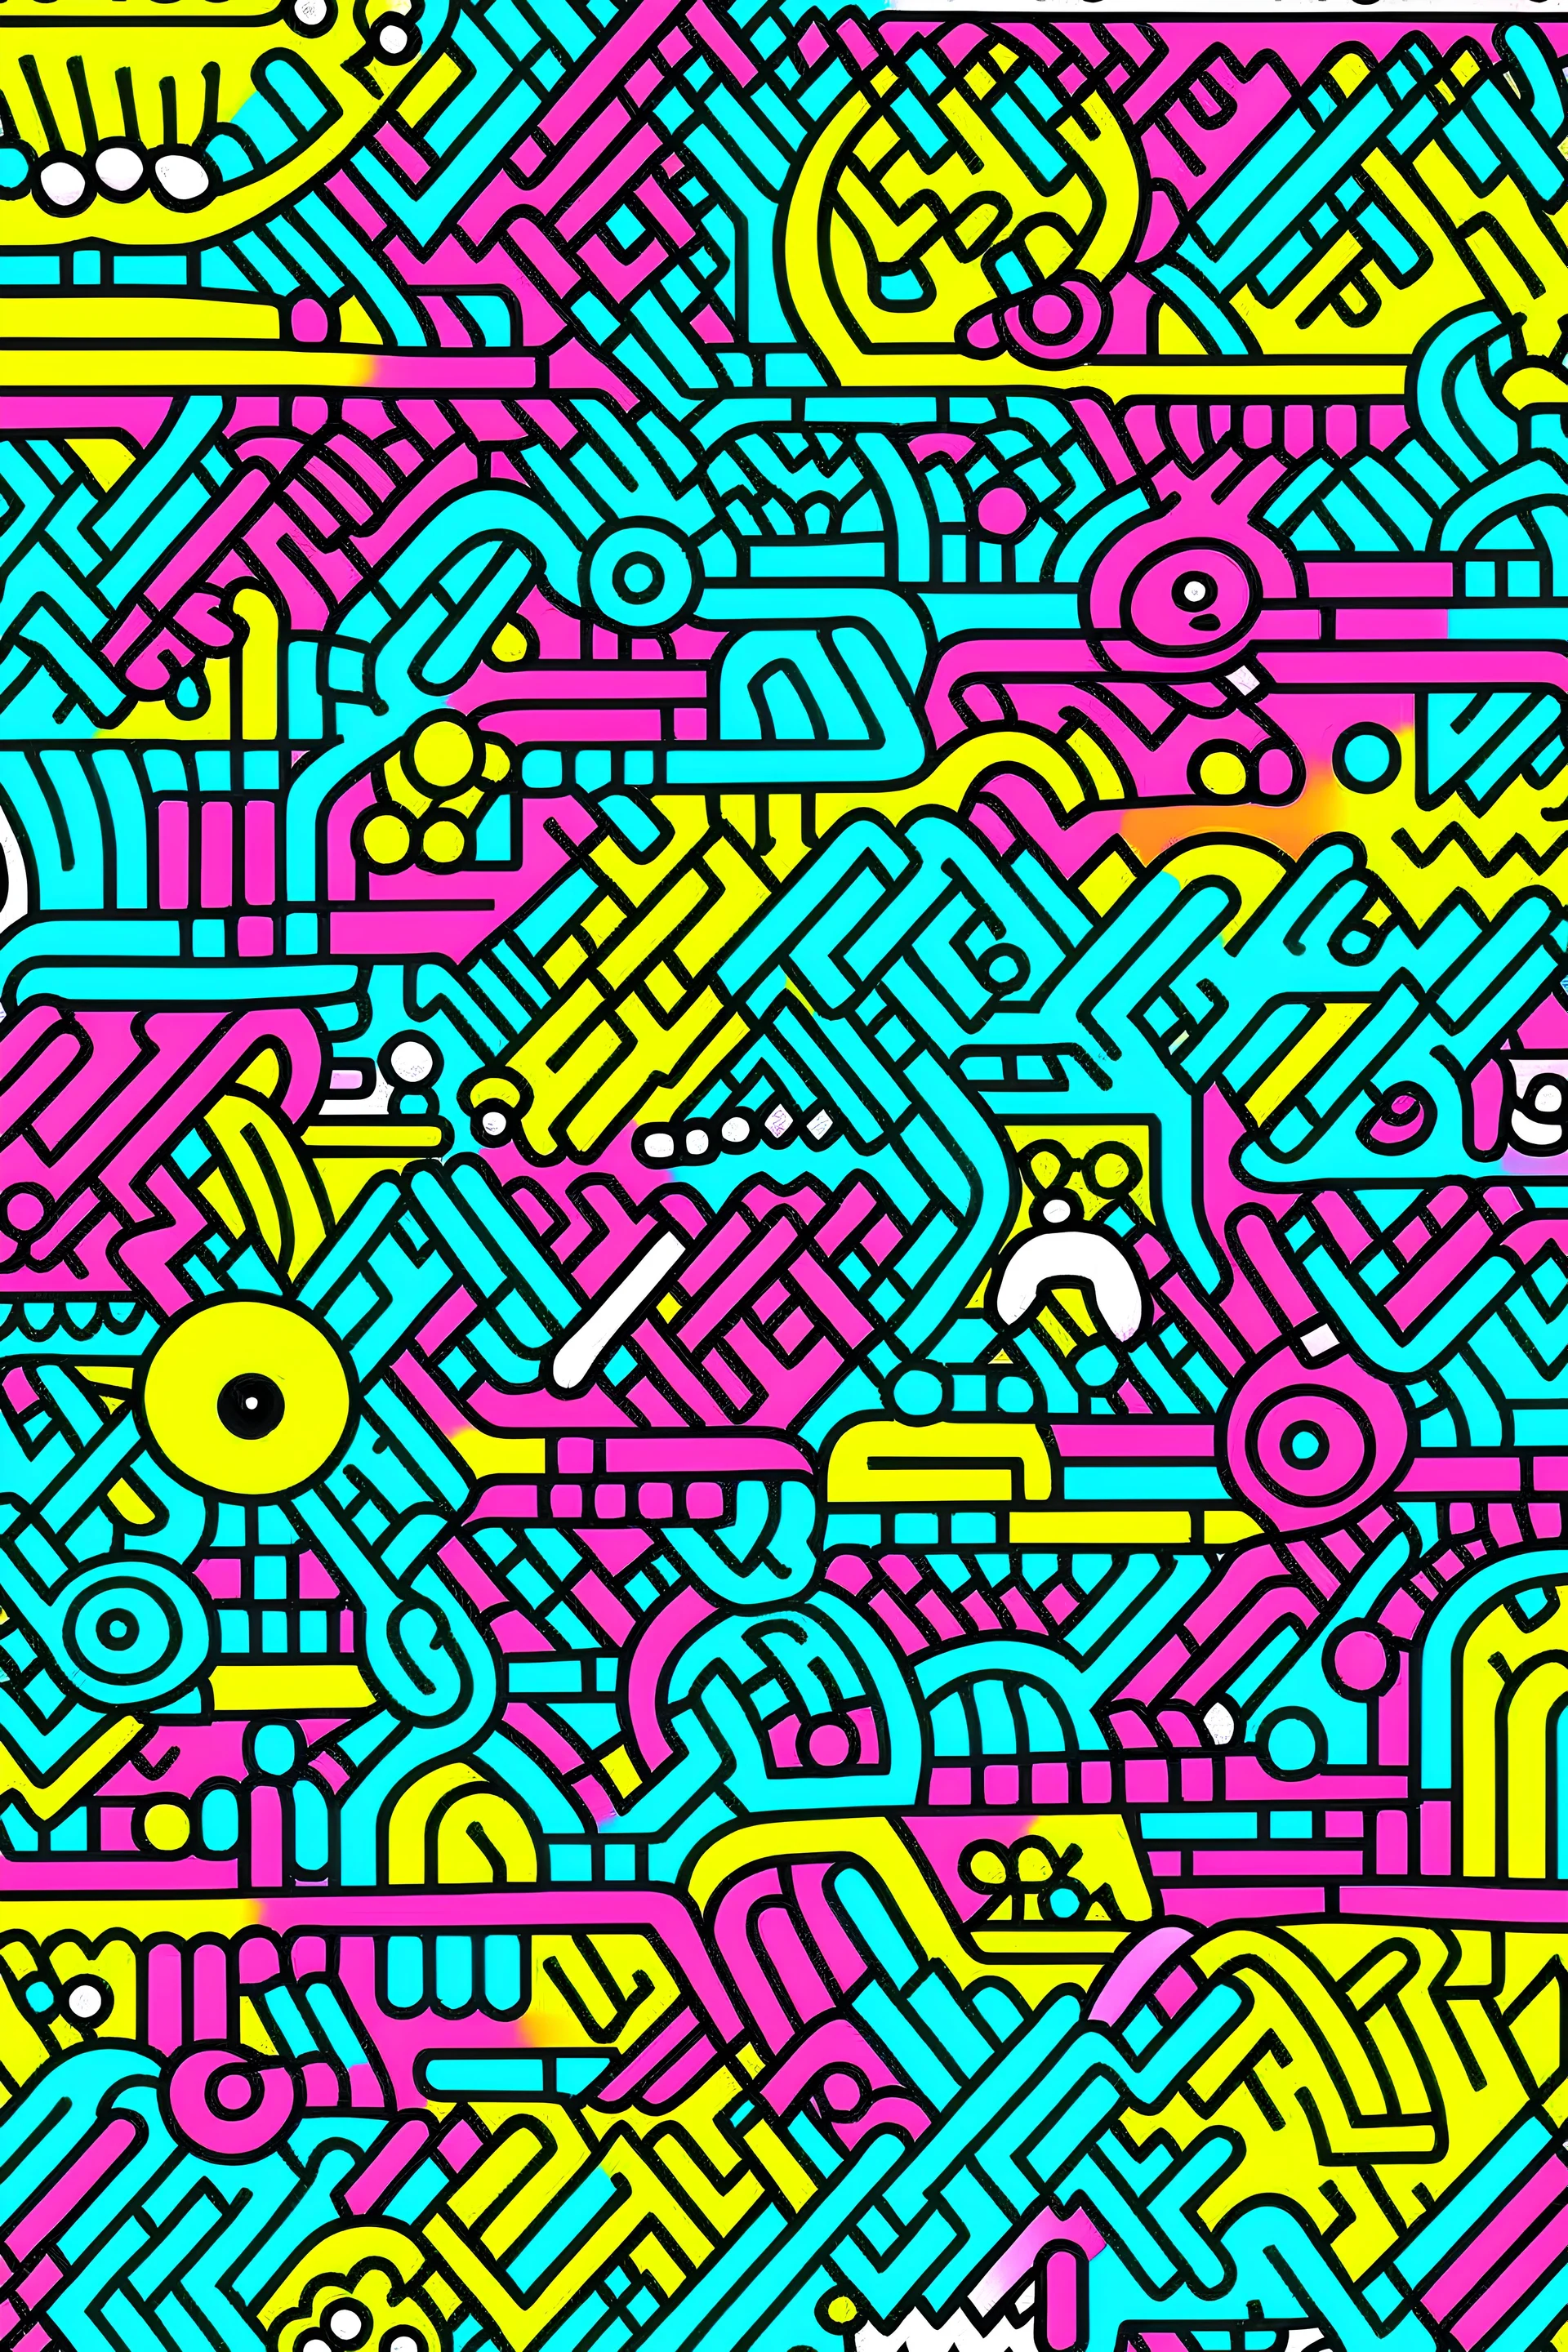 A vector line art image in the style of Keith Haring, with dozens of tiny abstract icons, using a single line weight. The color palette should heavily feature the colors cyan, magenta, yellow, and black, with a white background. The image should be low contrast with excessive white space.